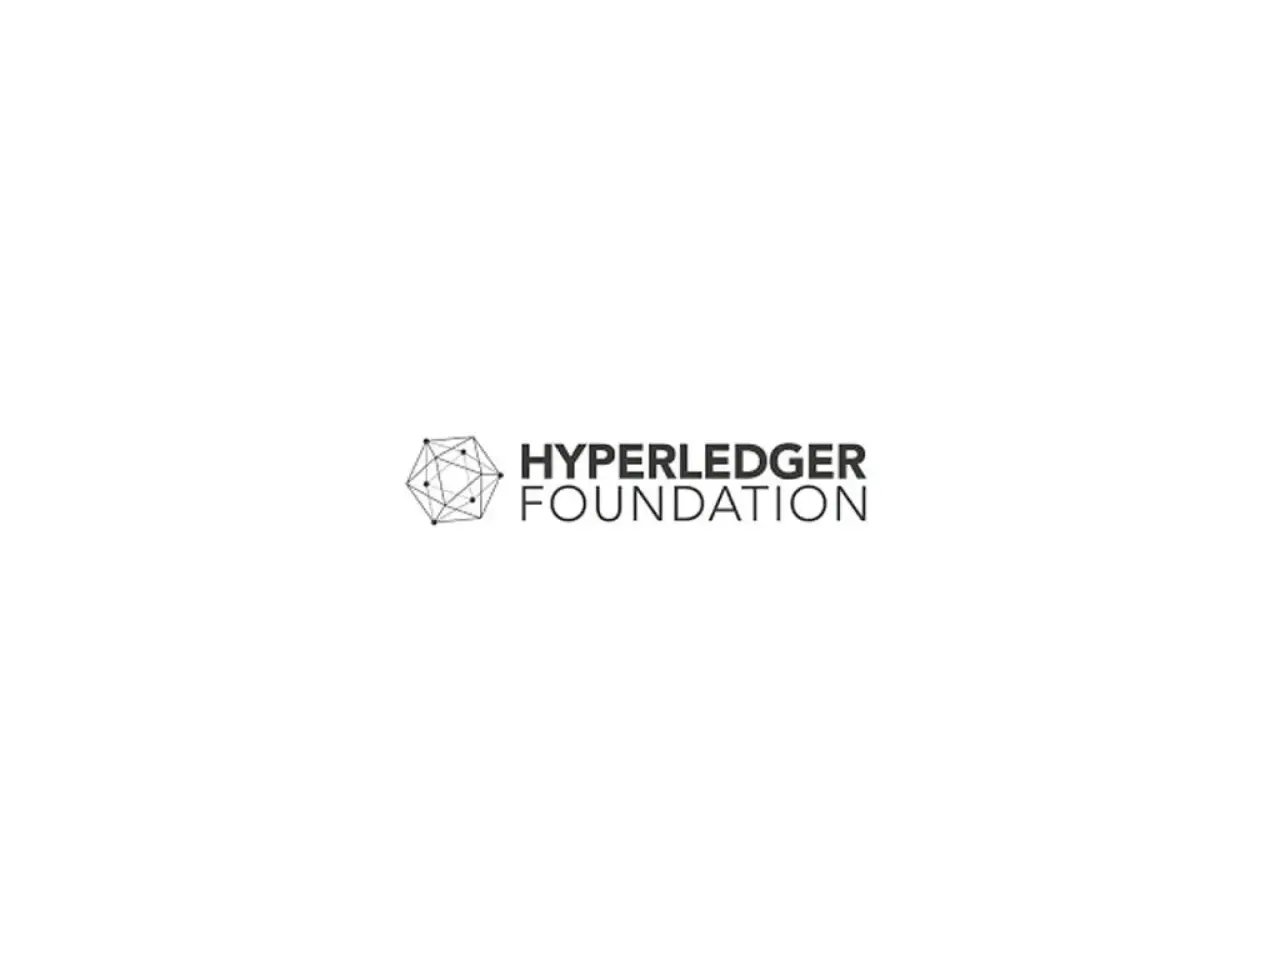 Hyperledger Announces Eight New Members, Including CasperLabs, Banque de France and more